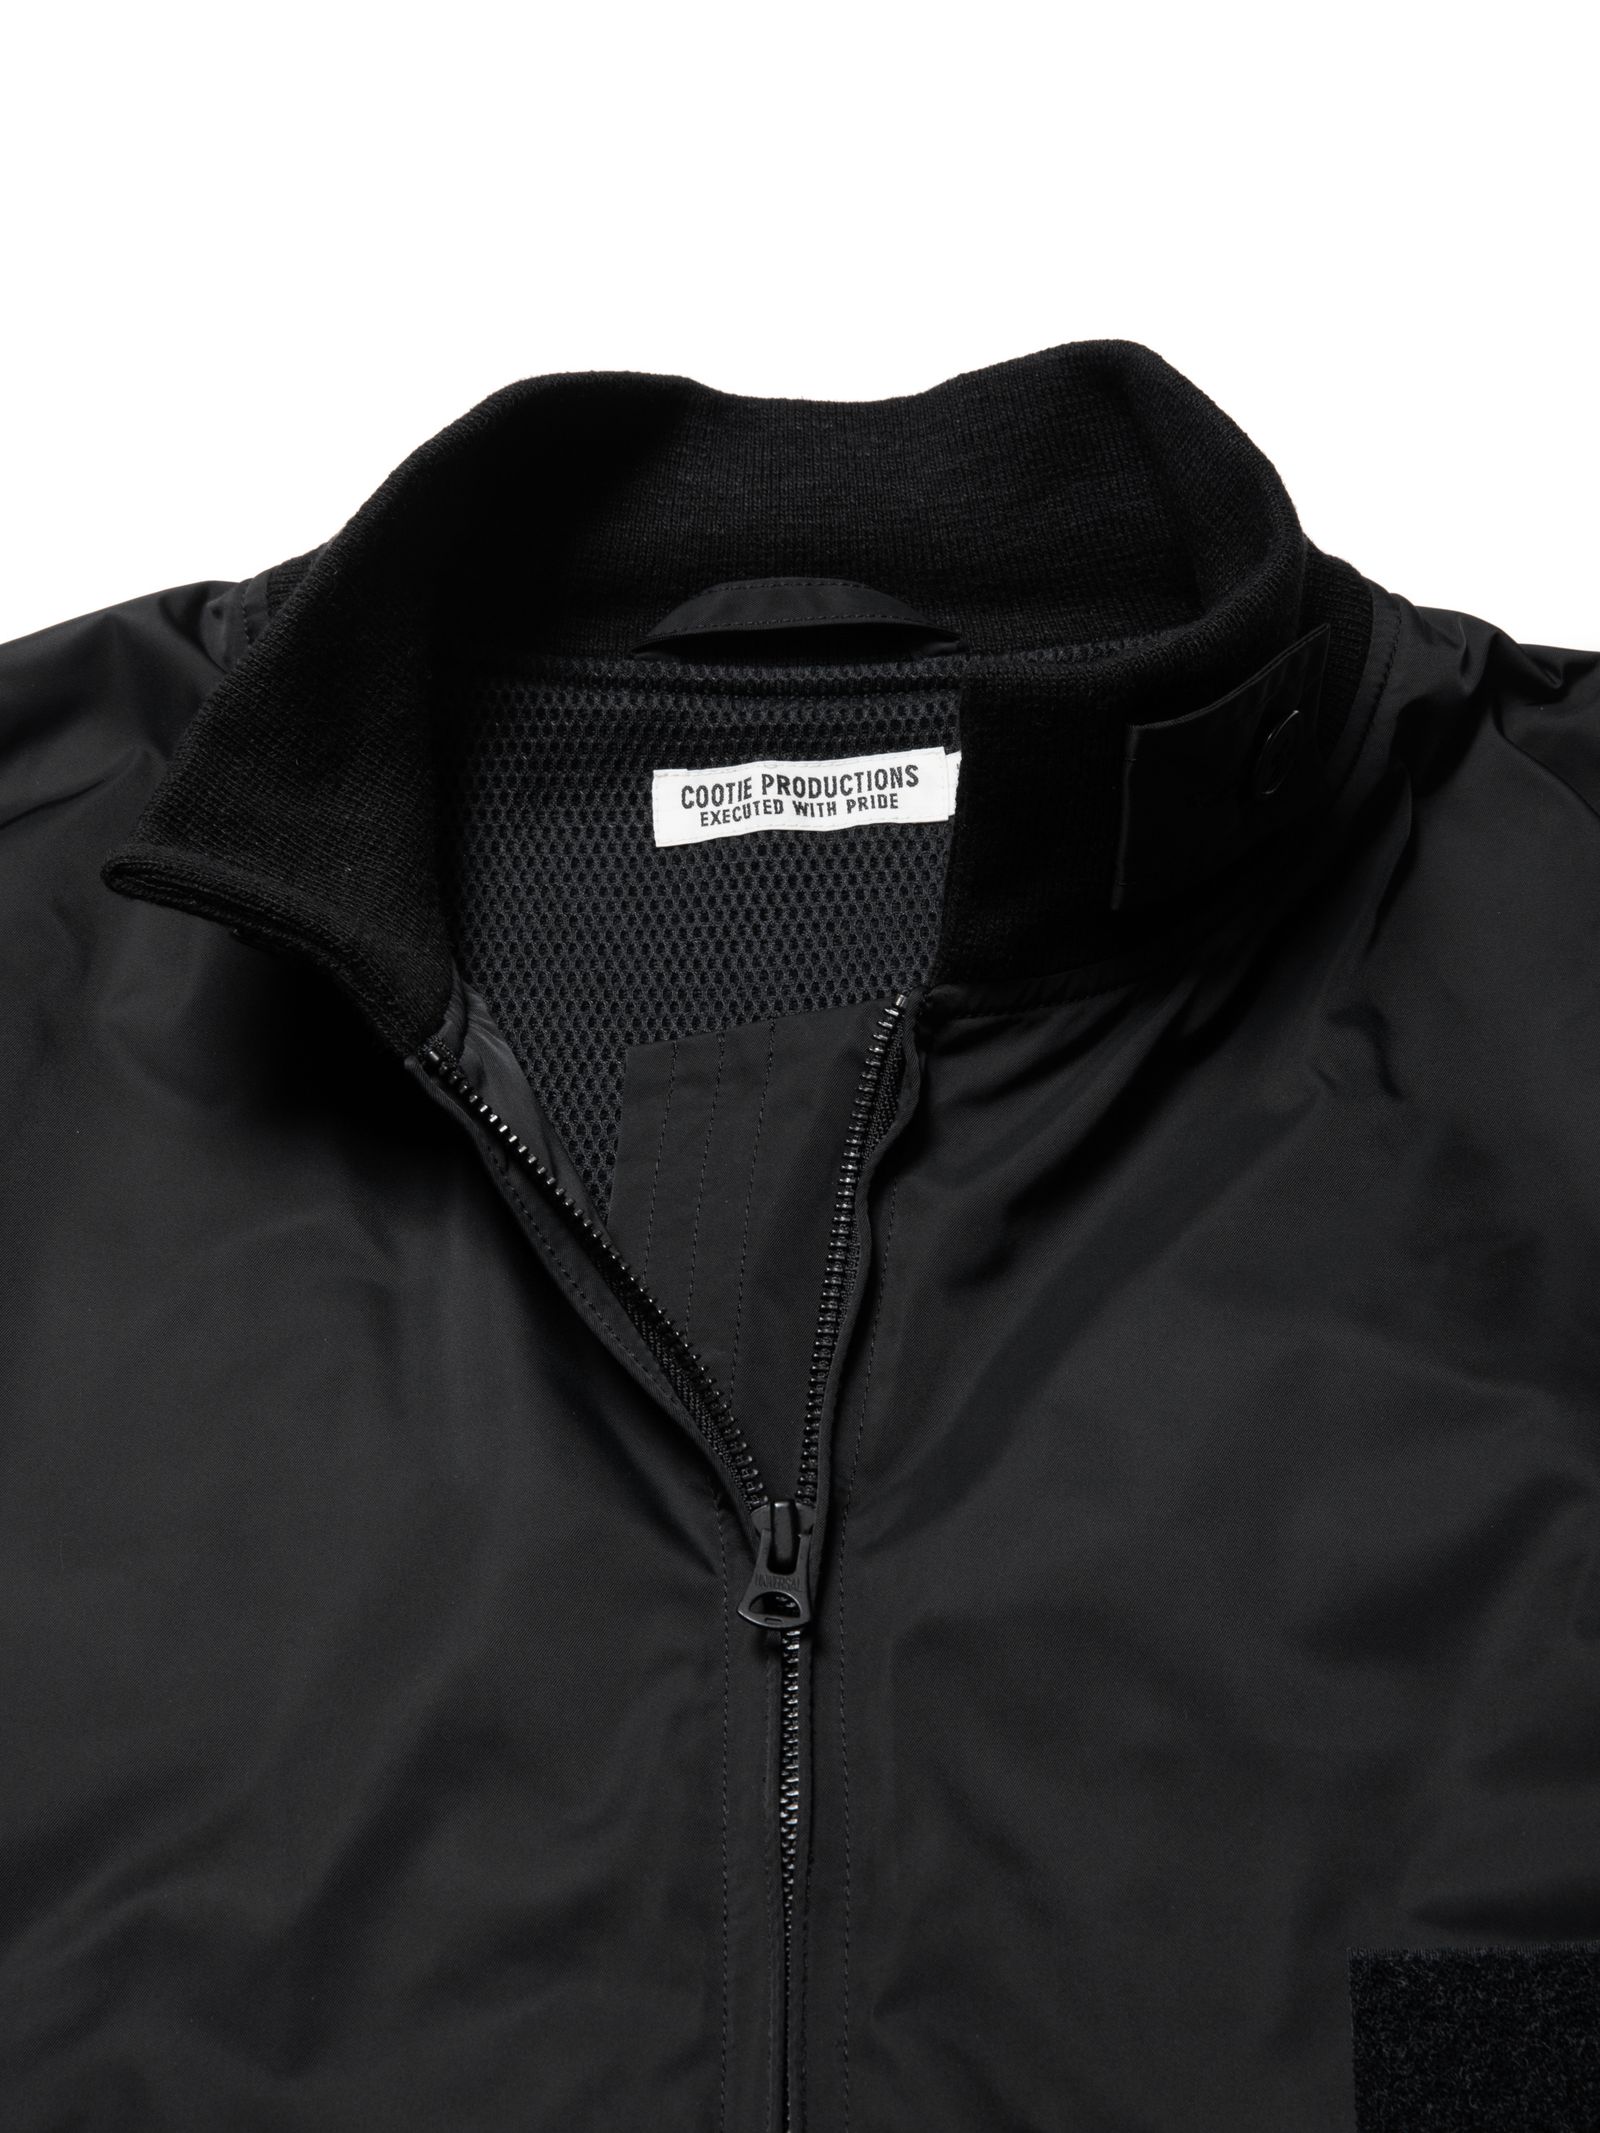 COOTIE PRODUCTIONS - Memory Polyester Twill WEP Jacket (BLACK